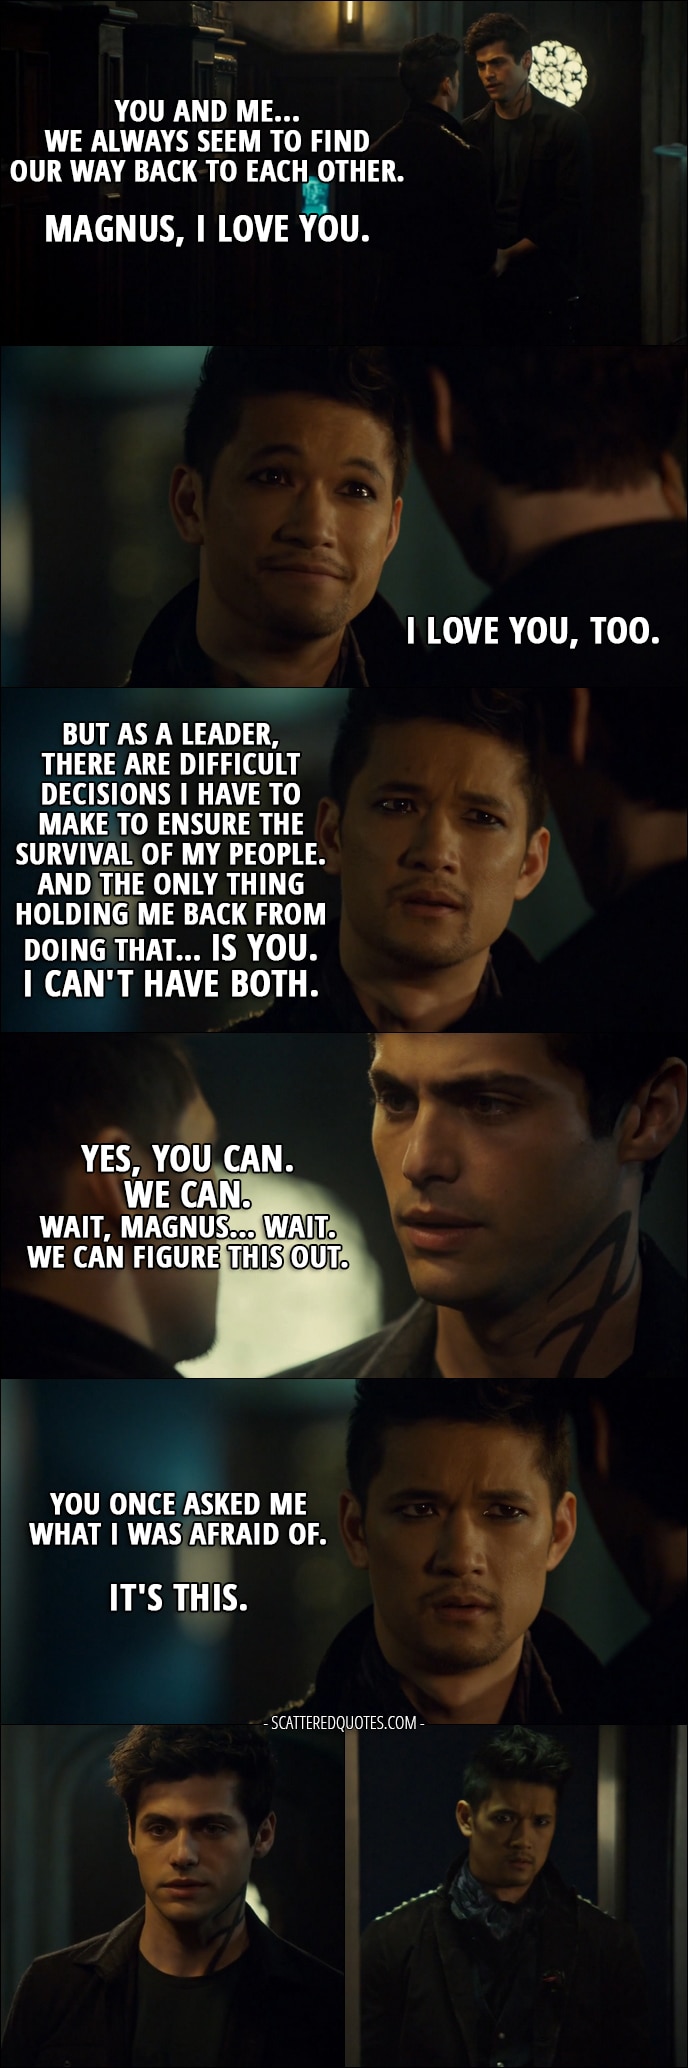 Quote from Shadowhunters 2x18 - Alec Lightwood: You and me... We always seem to find our way back to each other. Magnus, I love you. Magnus Bane: I love you, too. But as a leader, there are difficult decisions I have to make to ensure the survival of my people. And the only thing holding me back from doing that... is you. Alec Lightwood: No. No. Magnus Bane: I can't have both. Alec Lightwood: Yes, you can. We can. Wait, Magnus... wait. We can figure this out. Magnus Bane: You once asked me what I was afraid of. It's this.